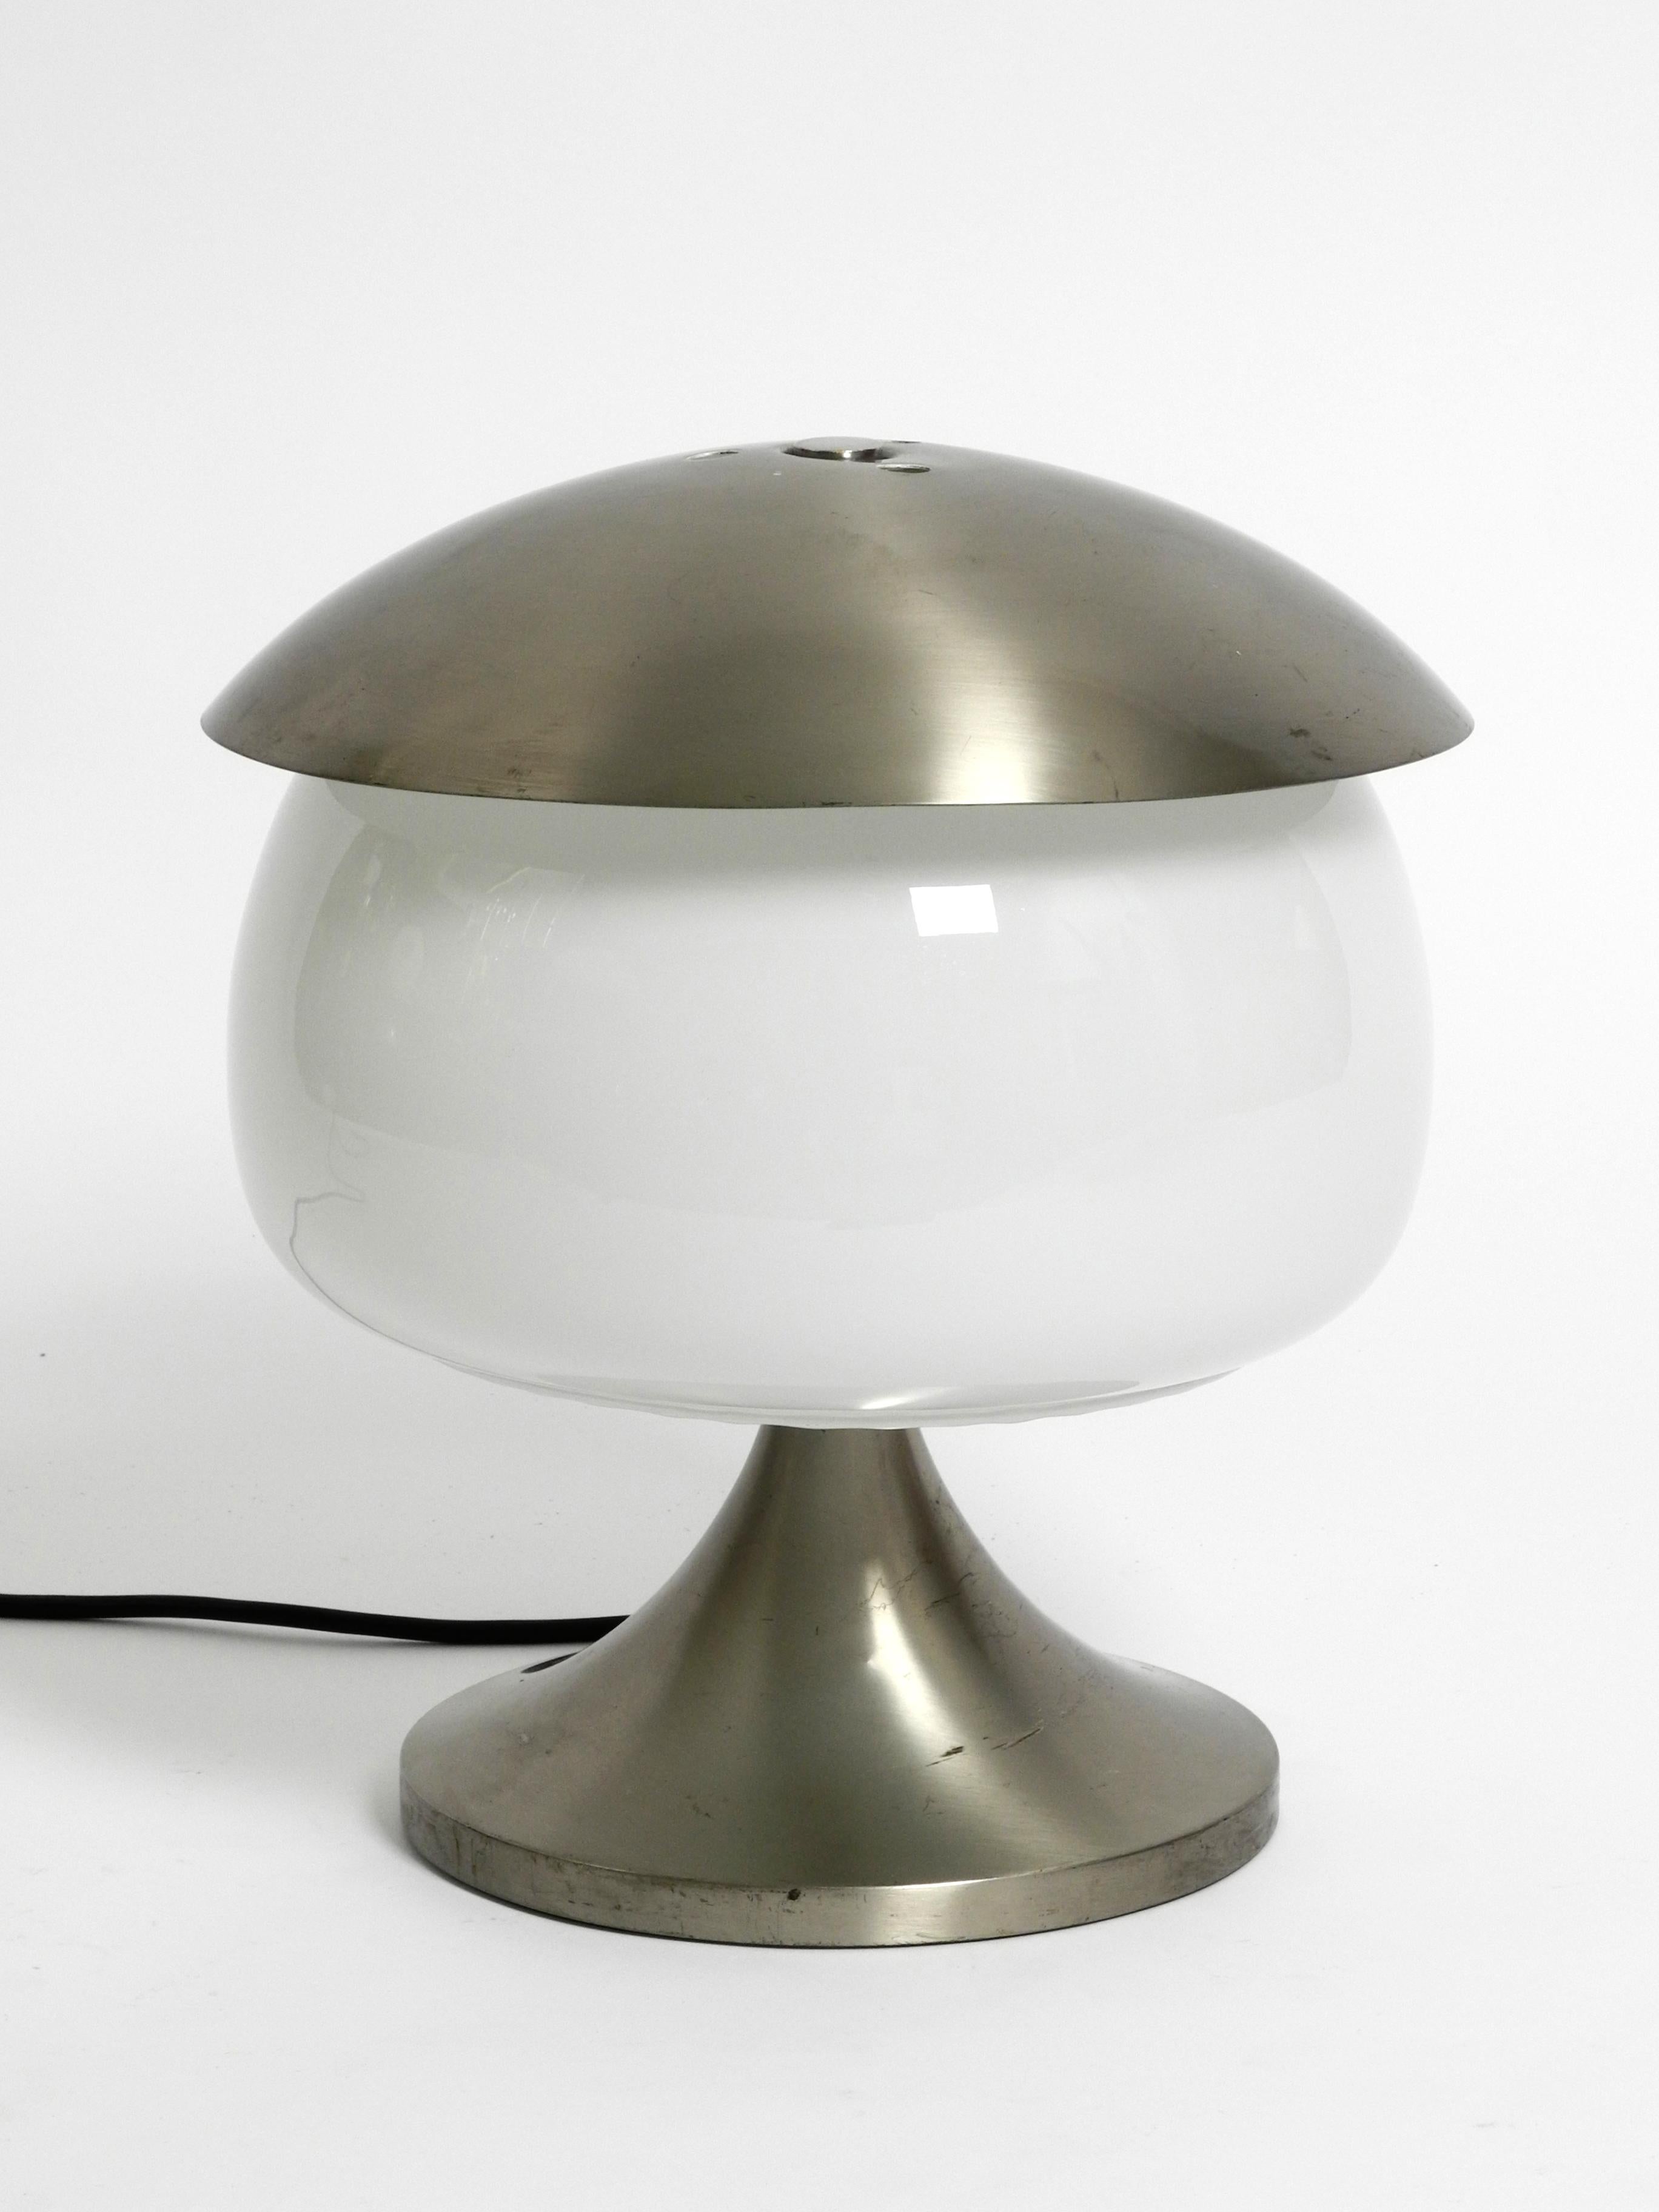 Rare large Italian table lamp made of solid aluminum and glass in space age design.
The base and the upper shade are made of thick, brushed aluminum. Large frosted glass shade.
Very good vintage condition with no damage to the frame, 
no dents